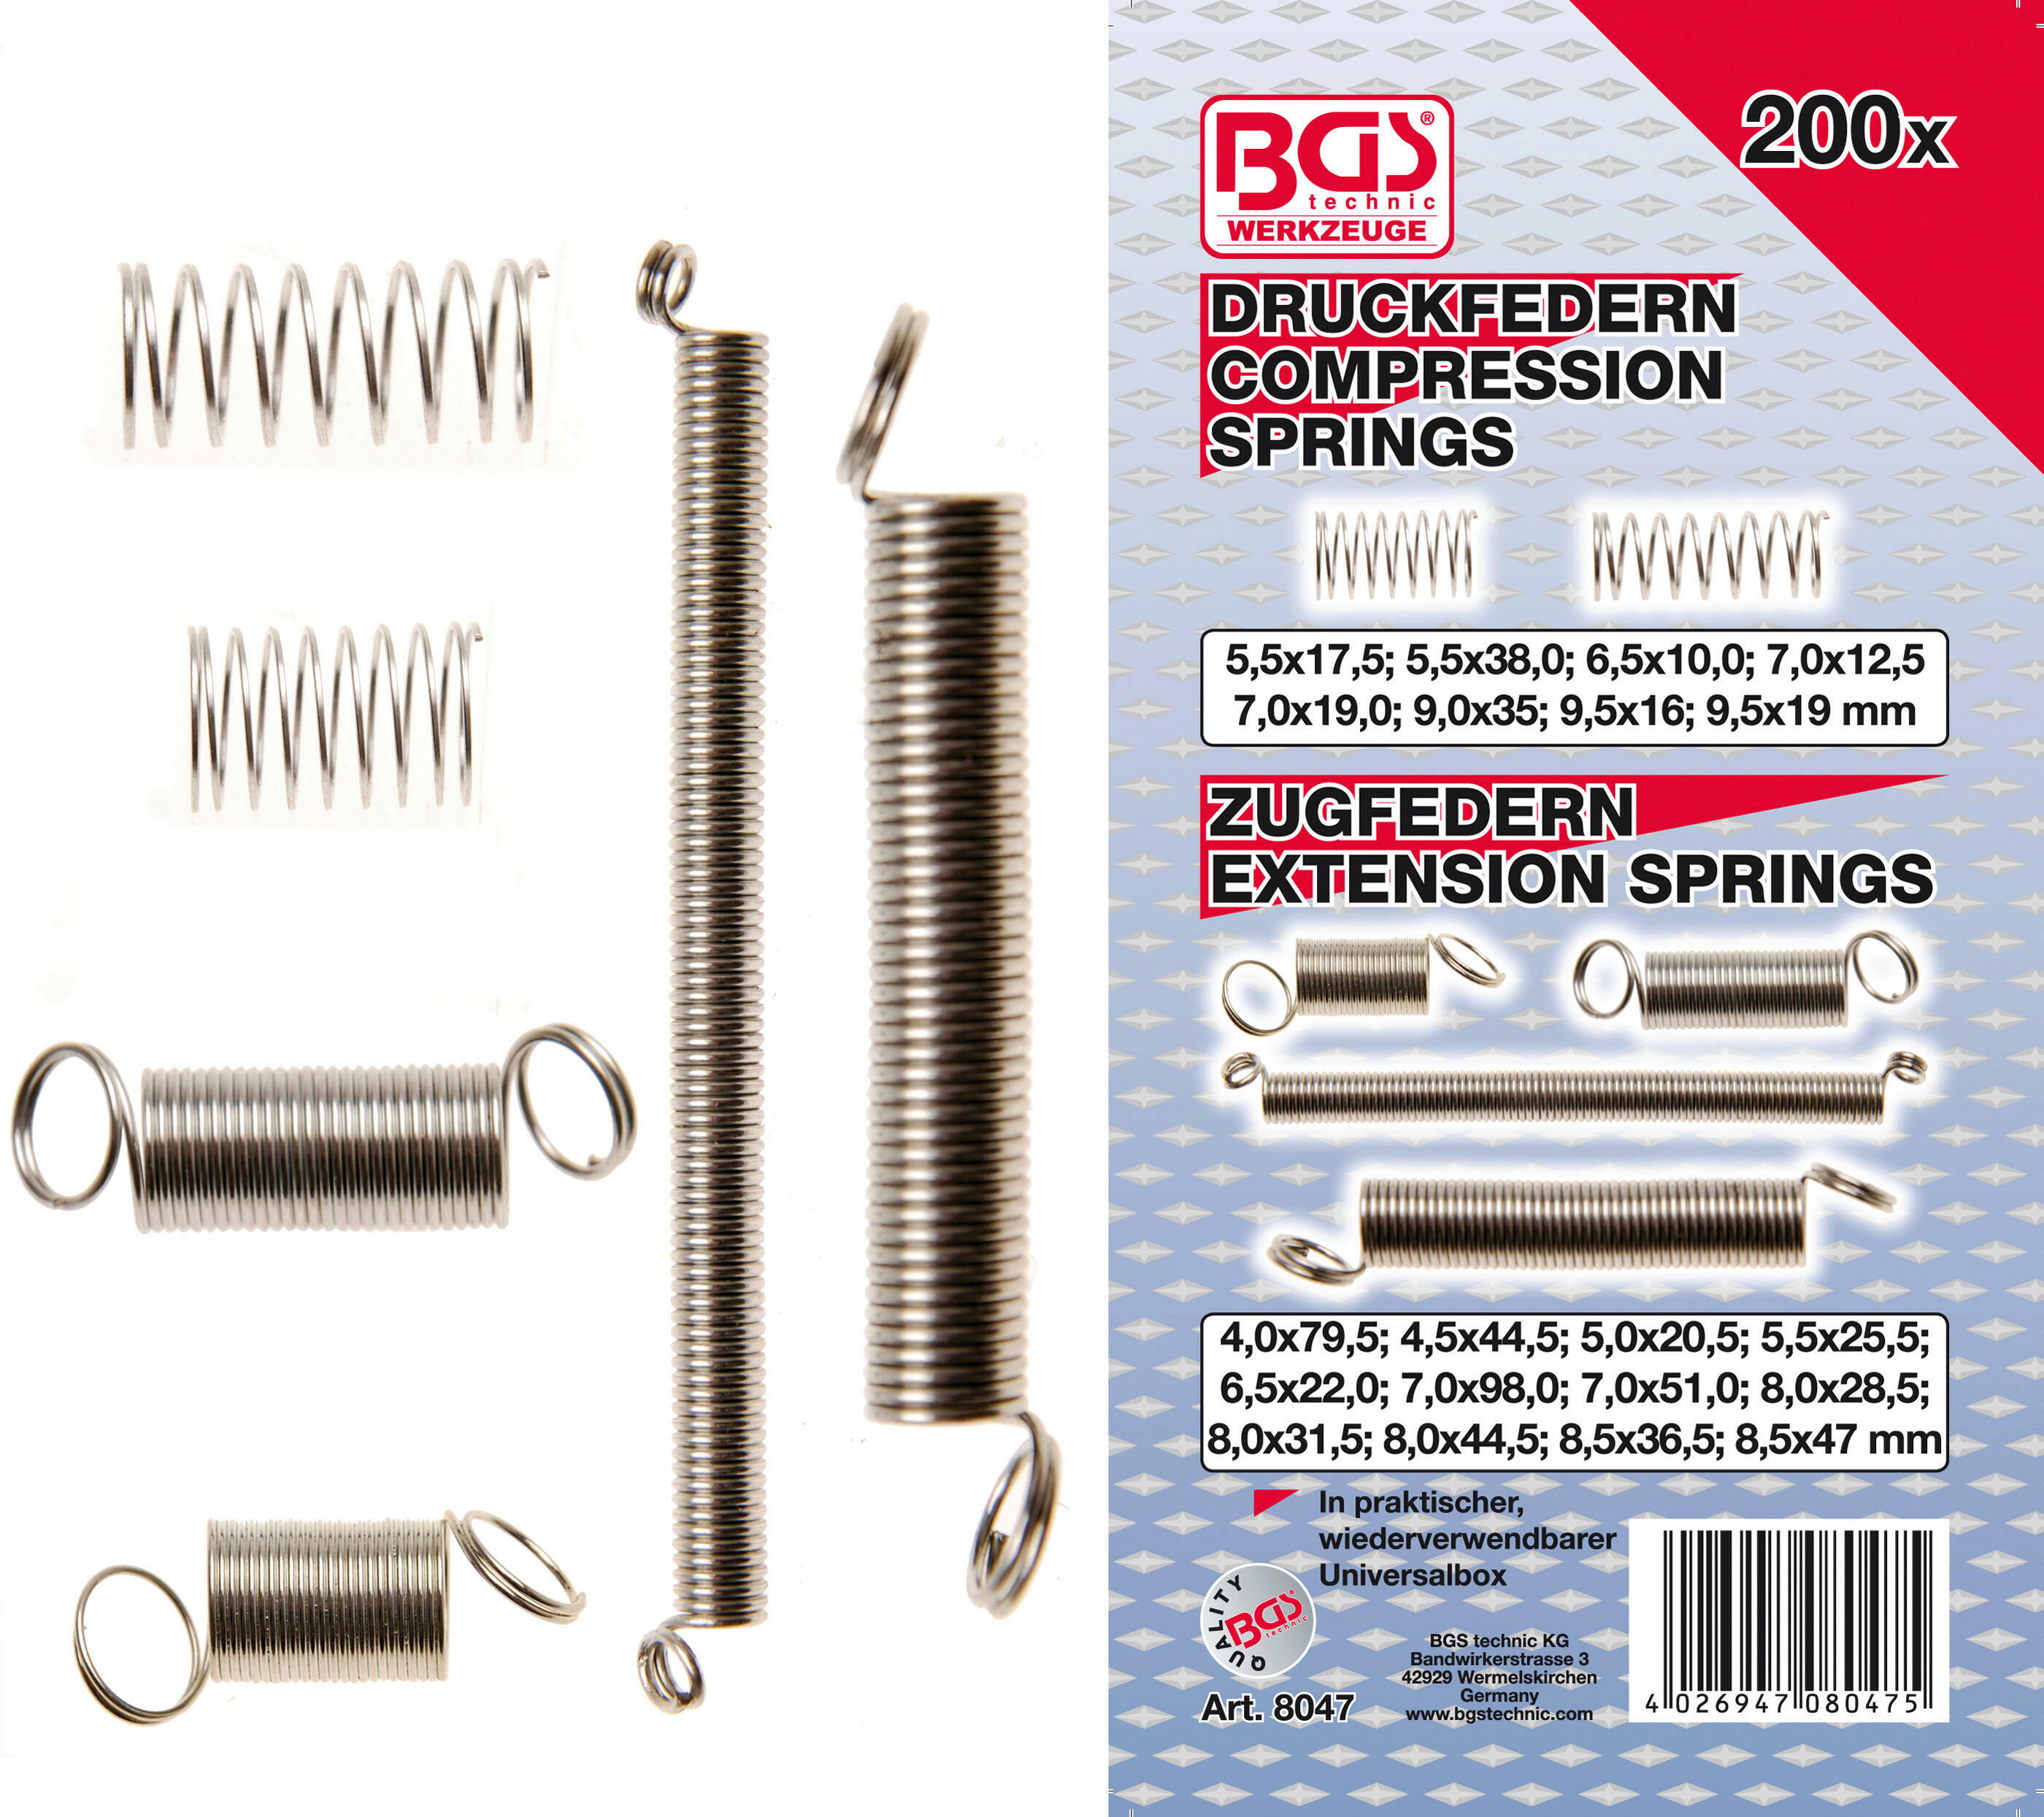 BGS Assortment, tension/compression springs